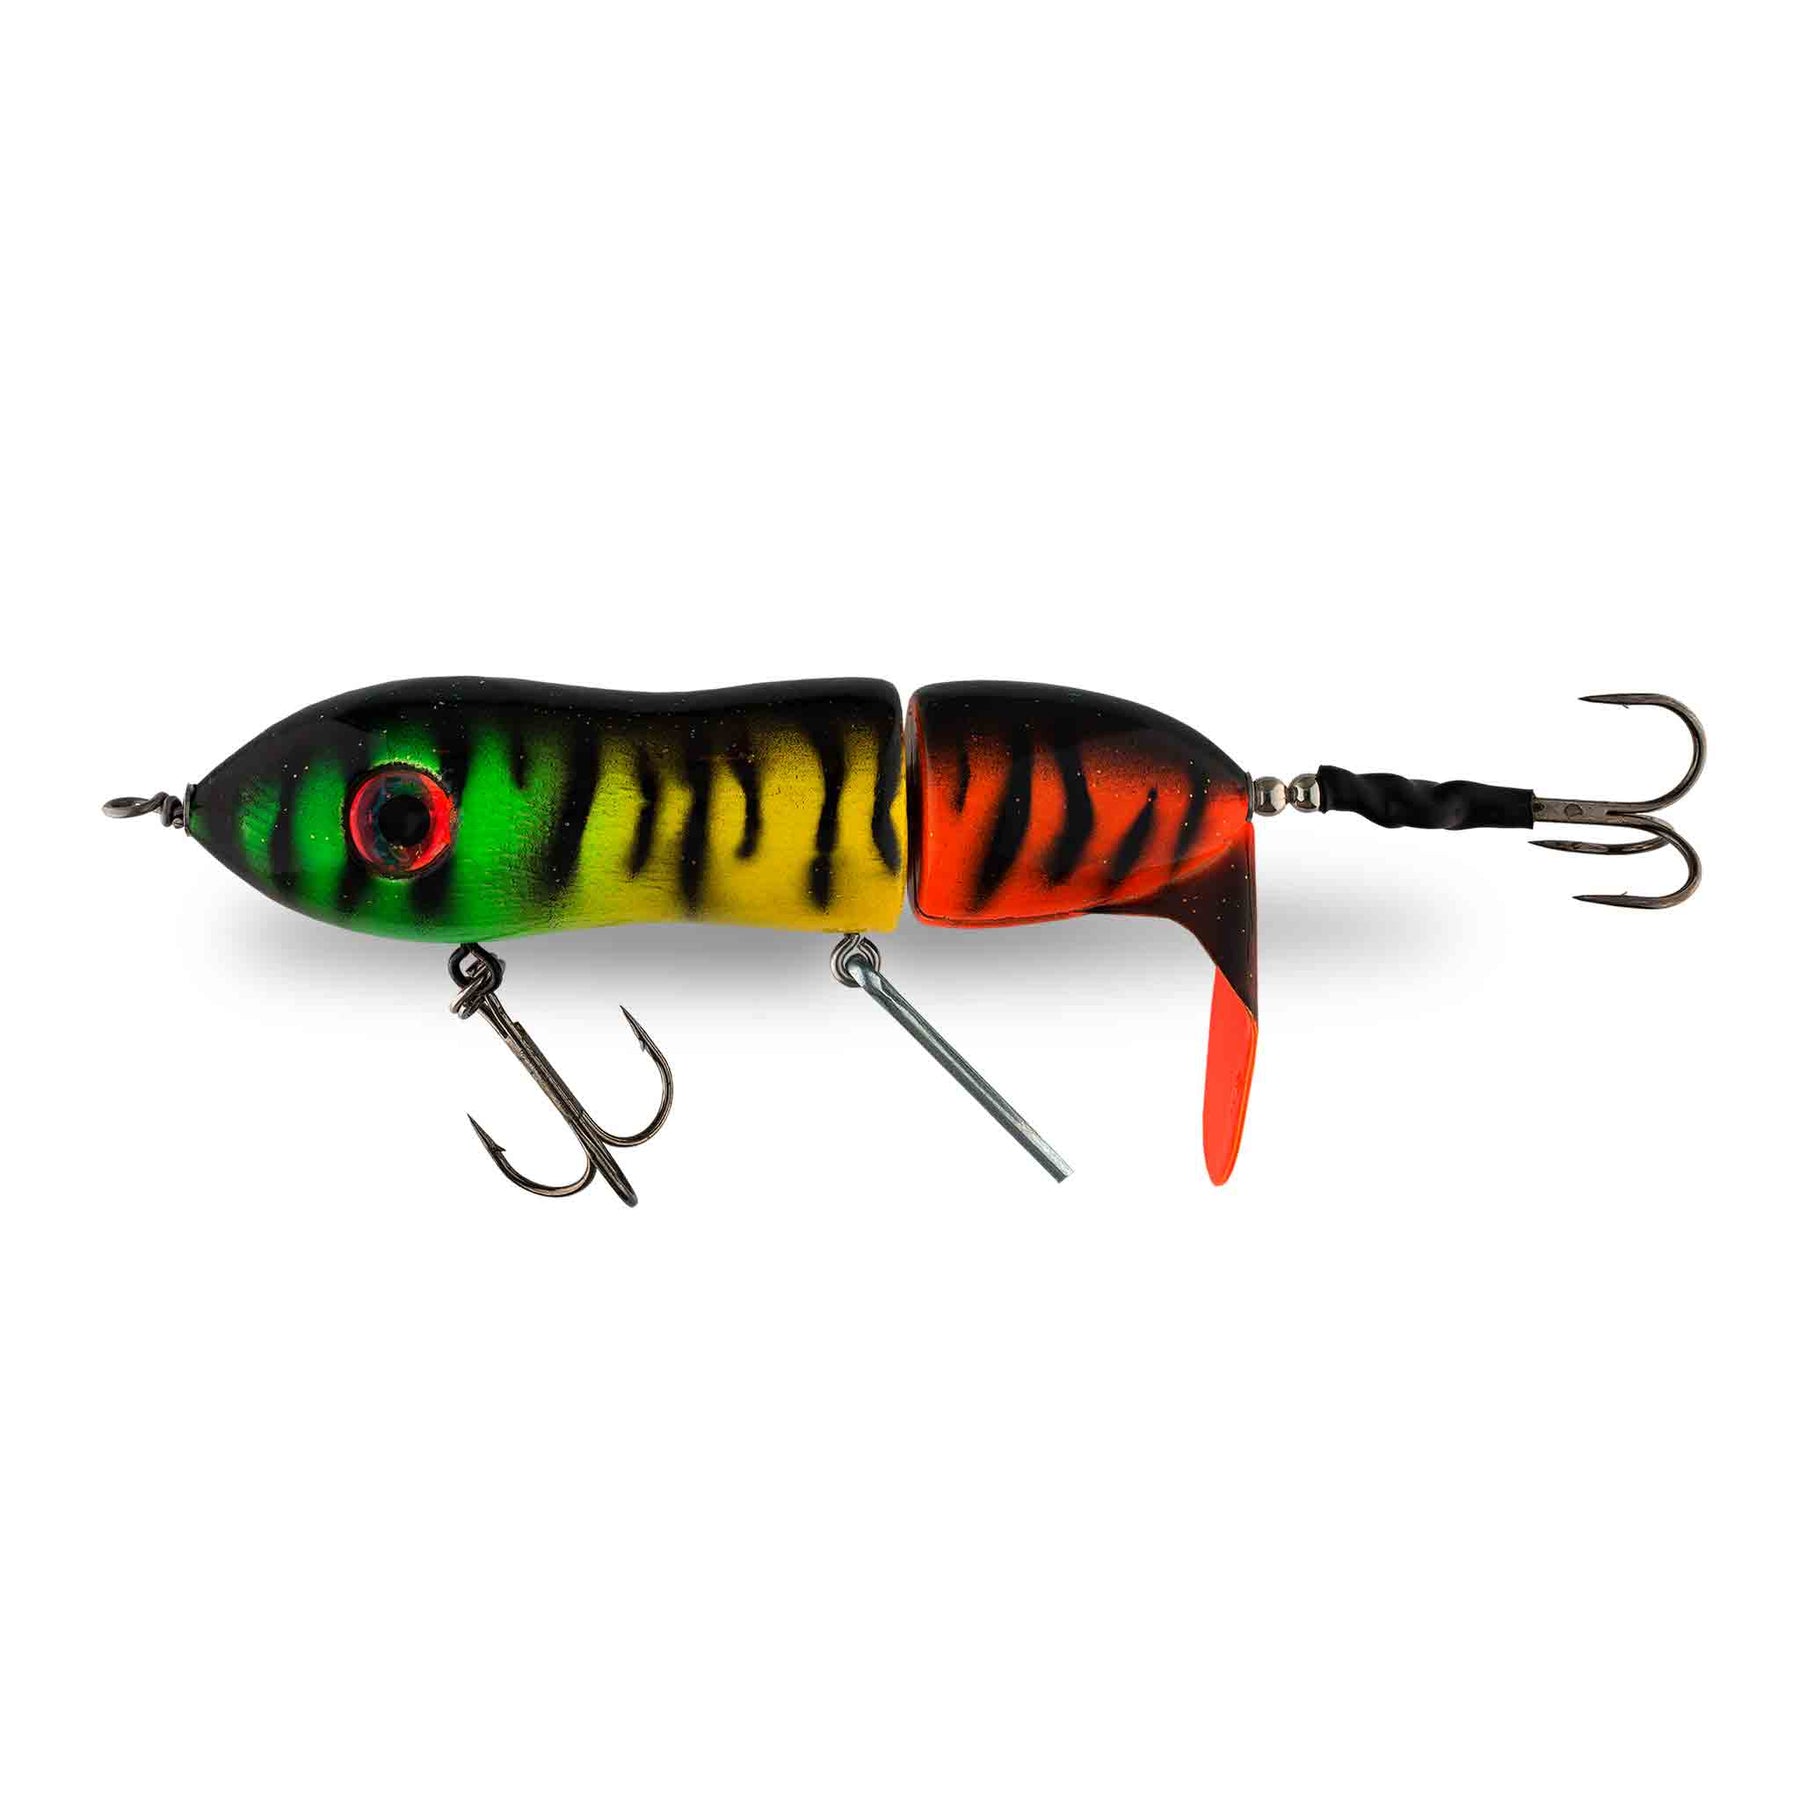 View of Topwater Big Mama Twis'td Sis'tr Clicker Propbait Fire Tiger available at EZOKO Pike and Musky Shop